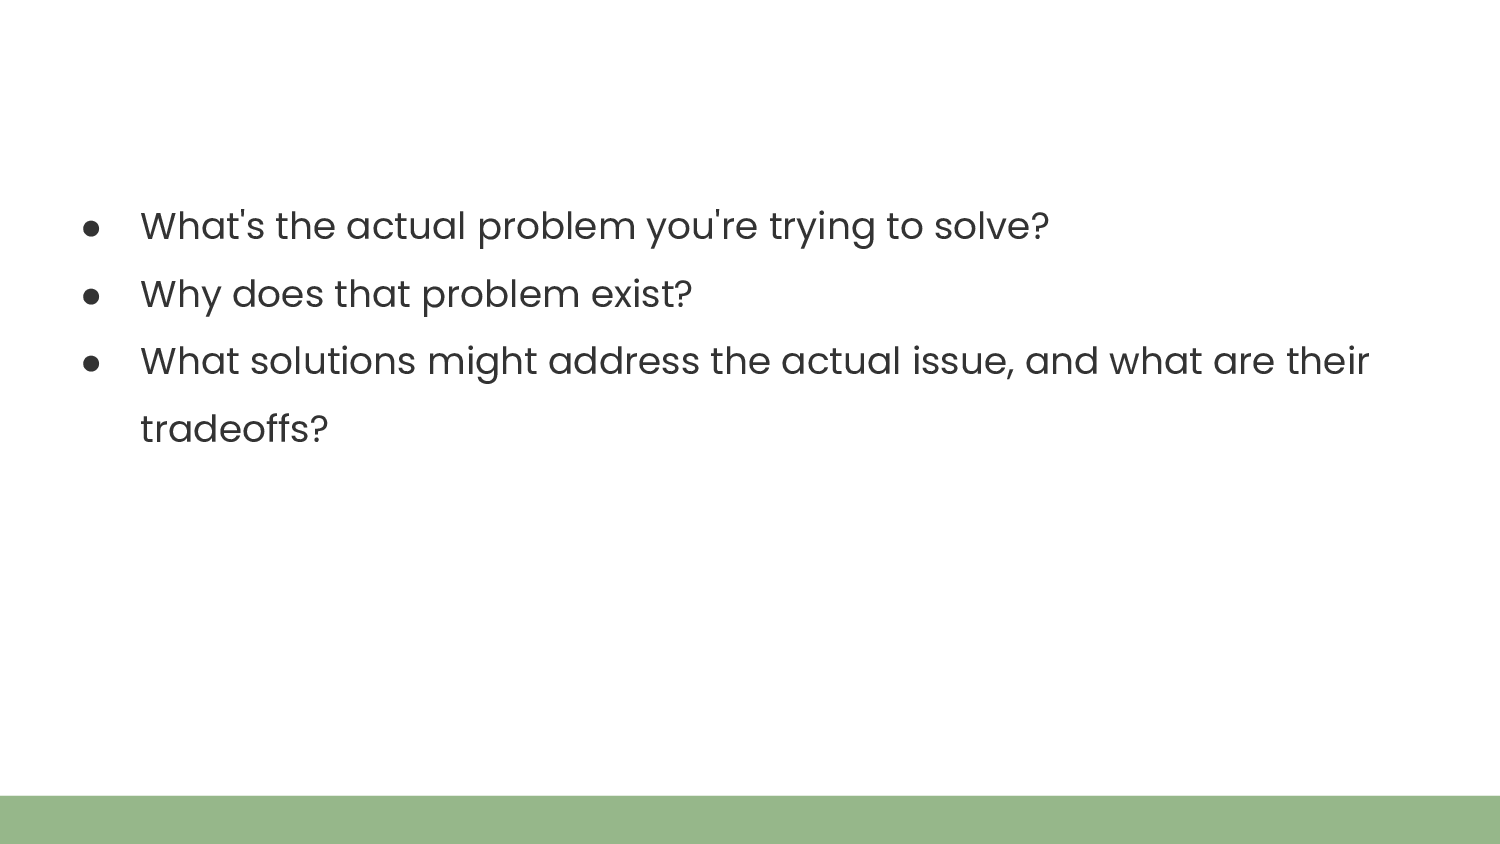 What's the actual problem you're trying to solve? Why does that problem exist? What solutions might address the actual issue, and what are their tradeoffs?